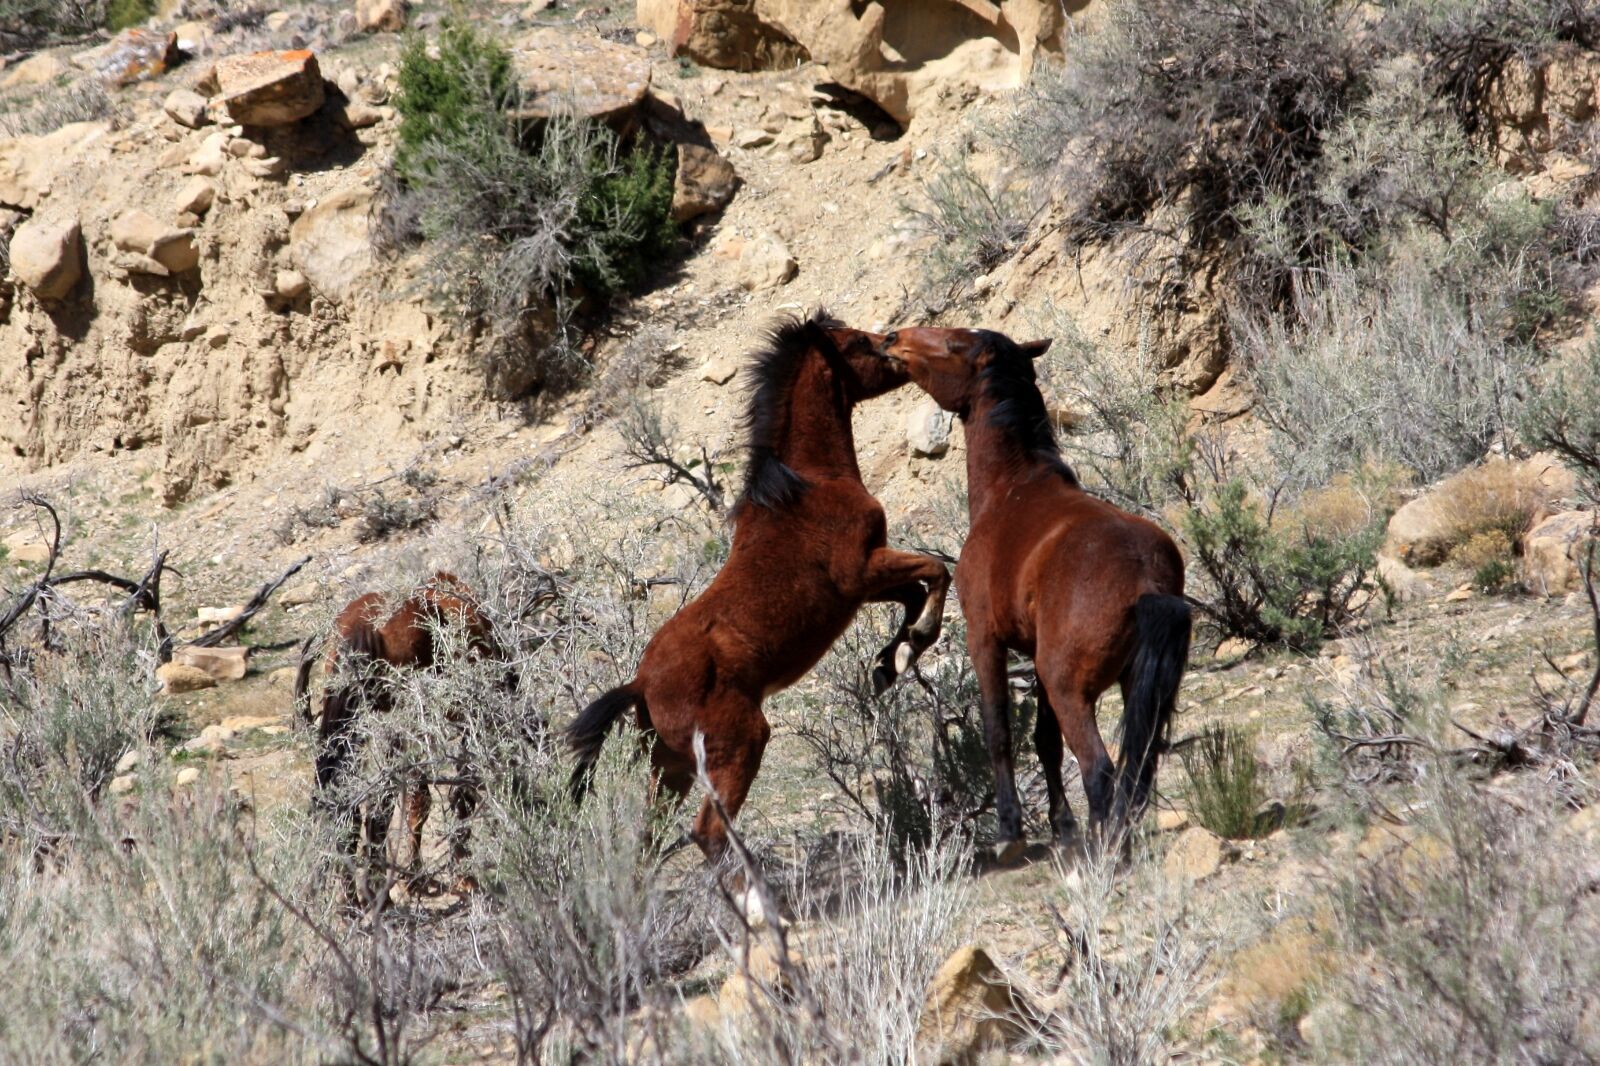 Wild horses in Colorado playing